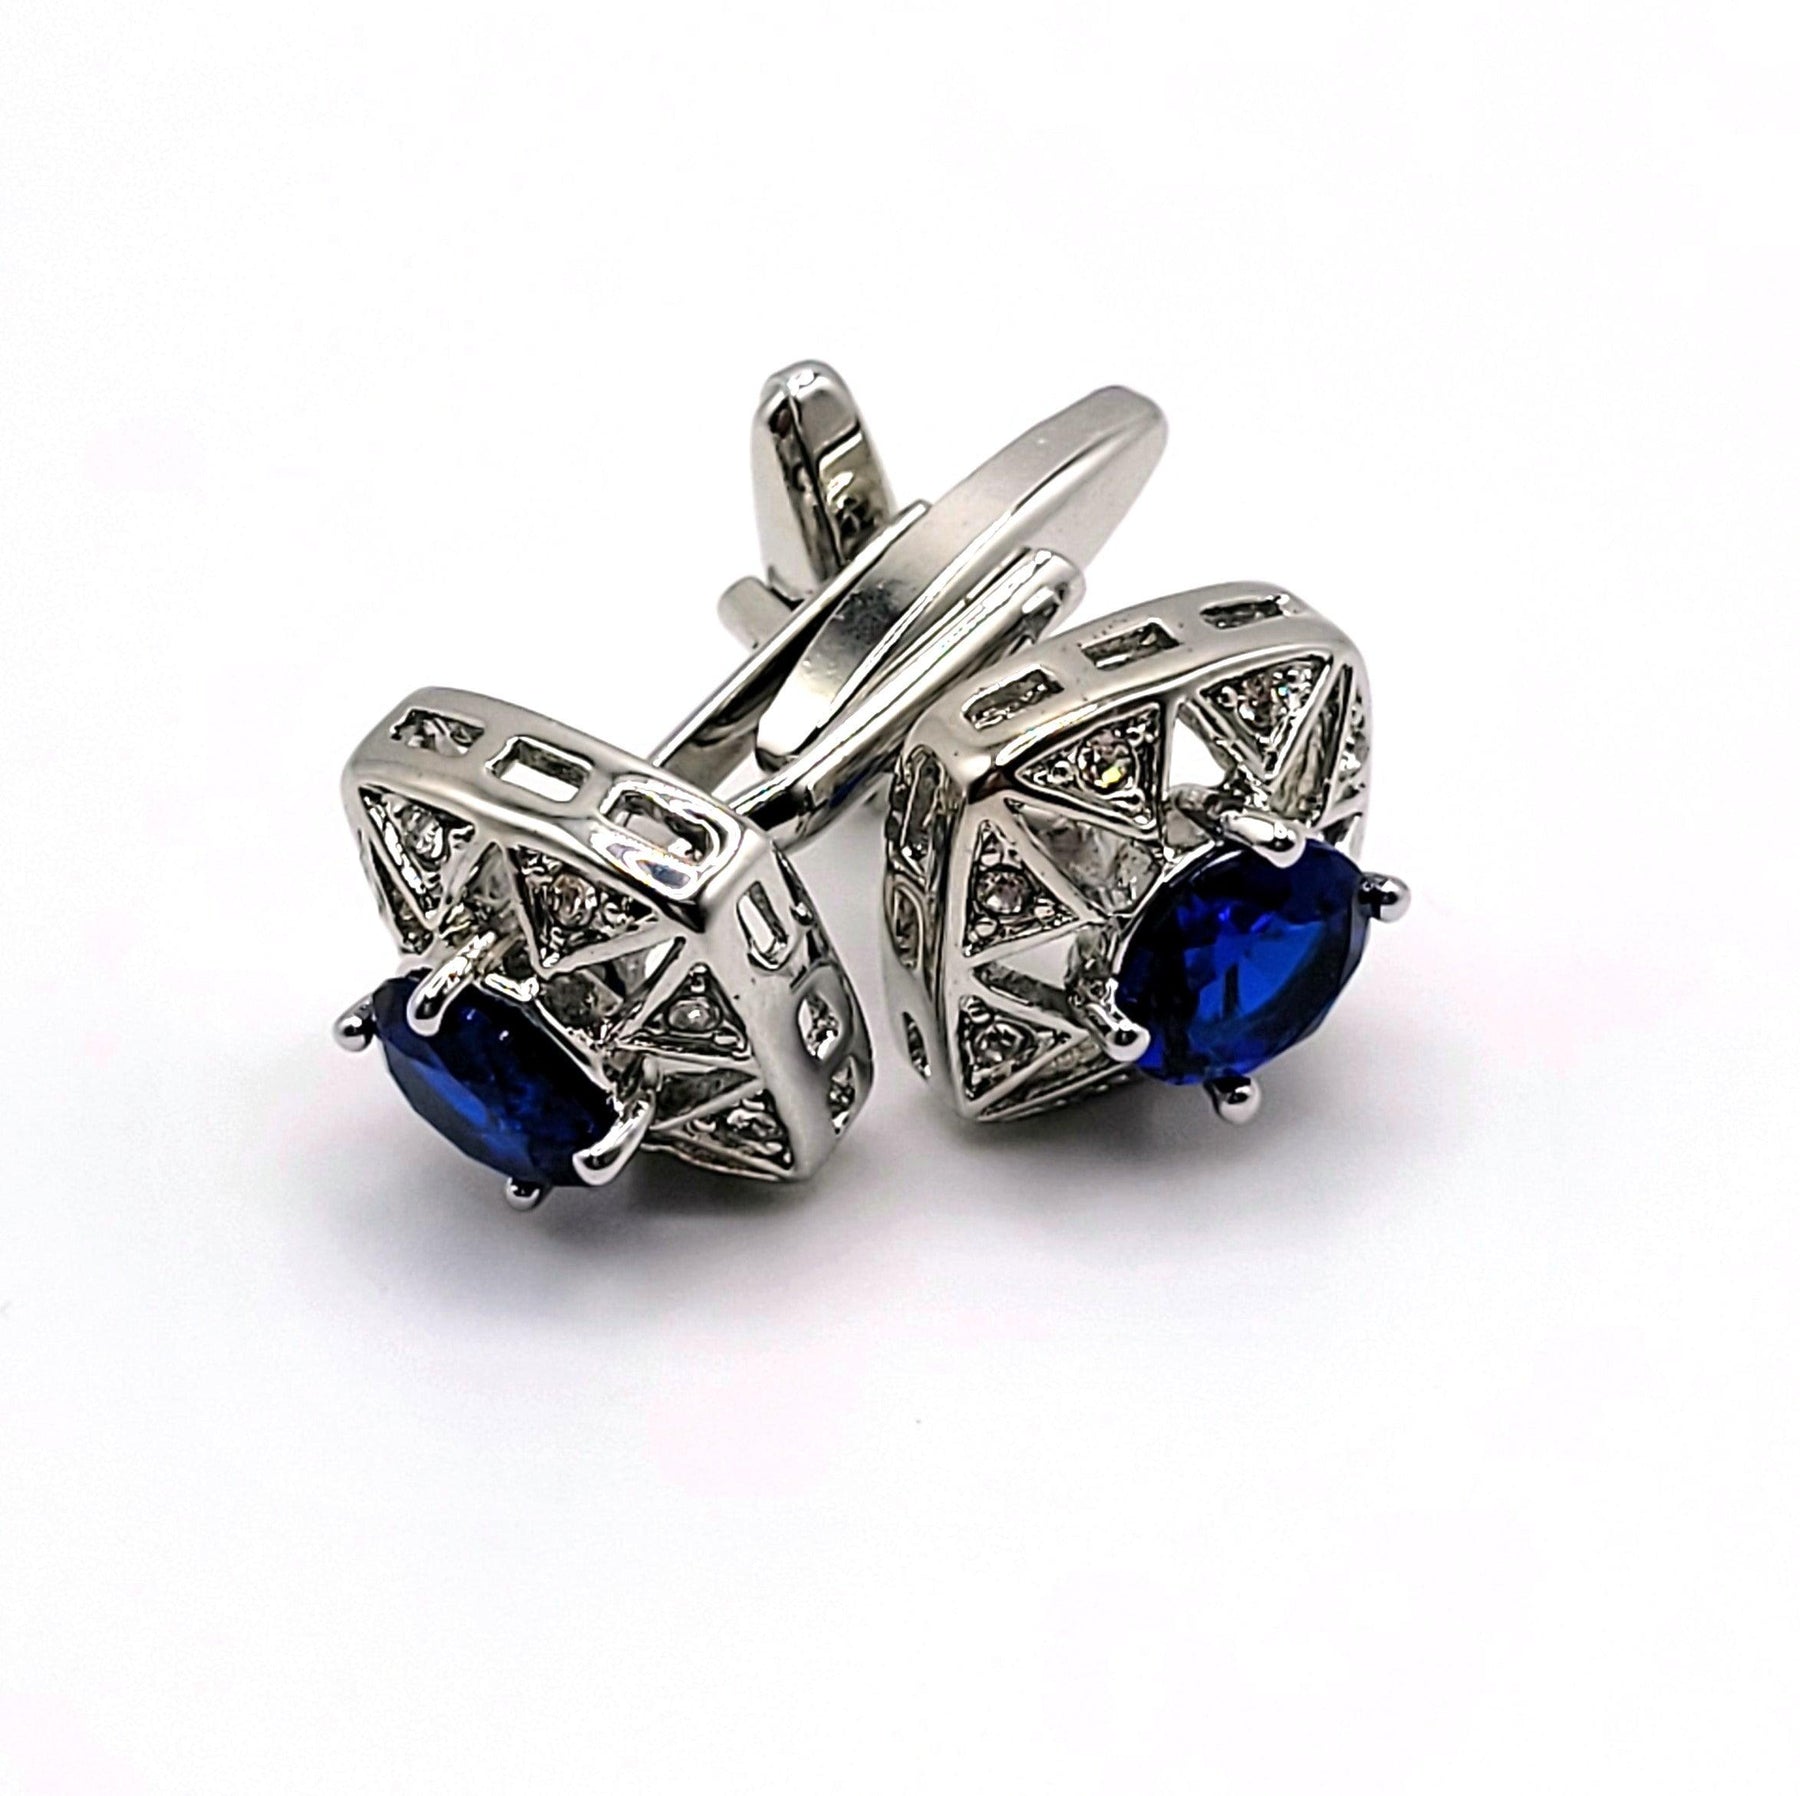 Silver Cufflinks with Blue Gem - The Upscale Banker